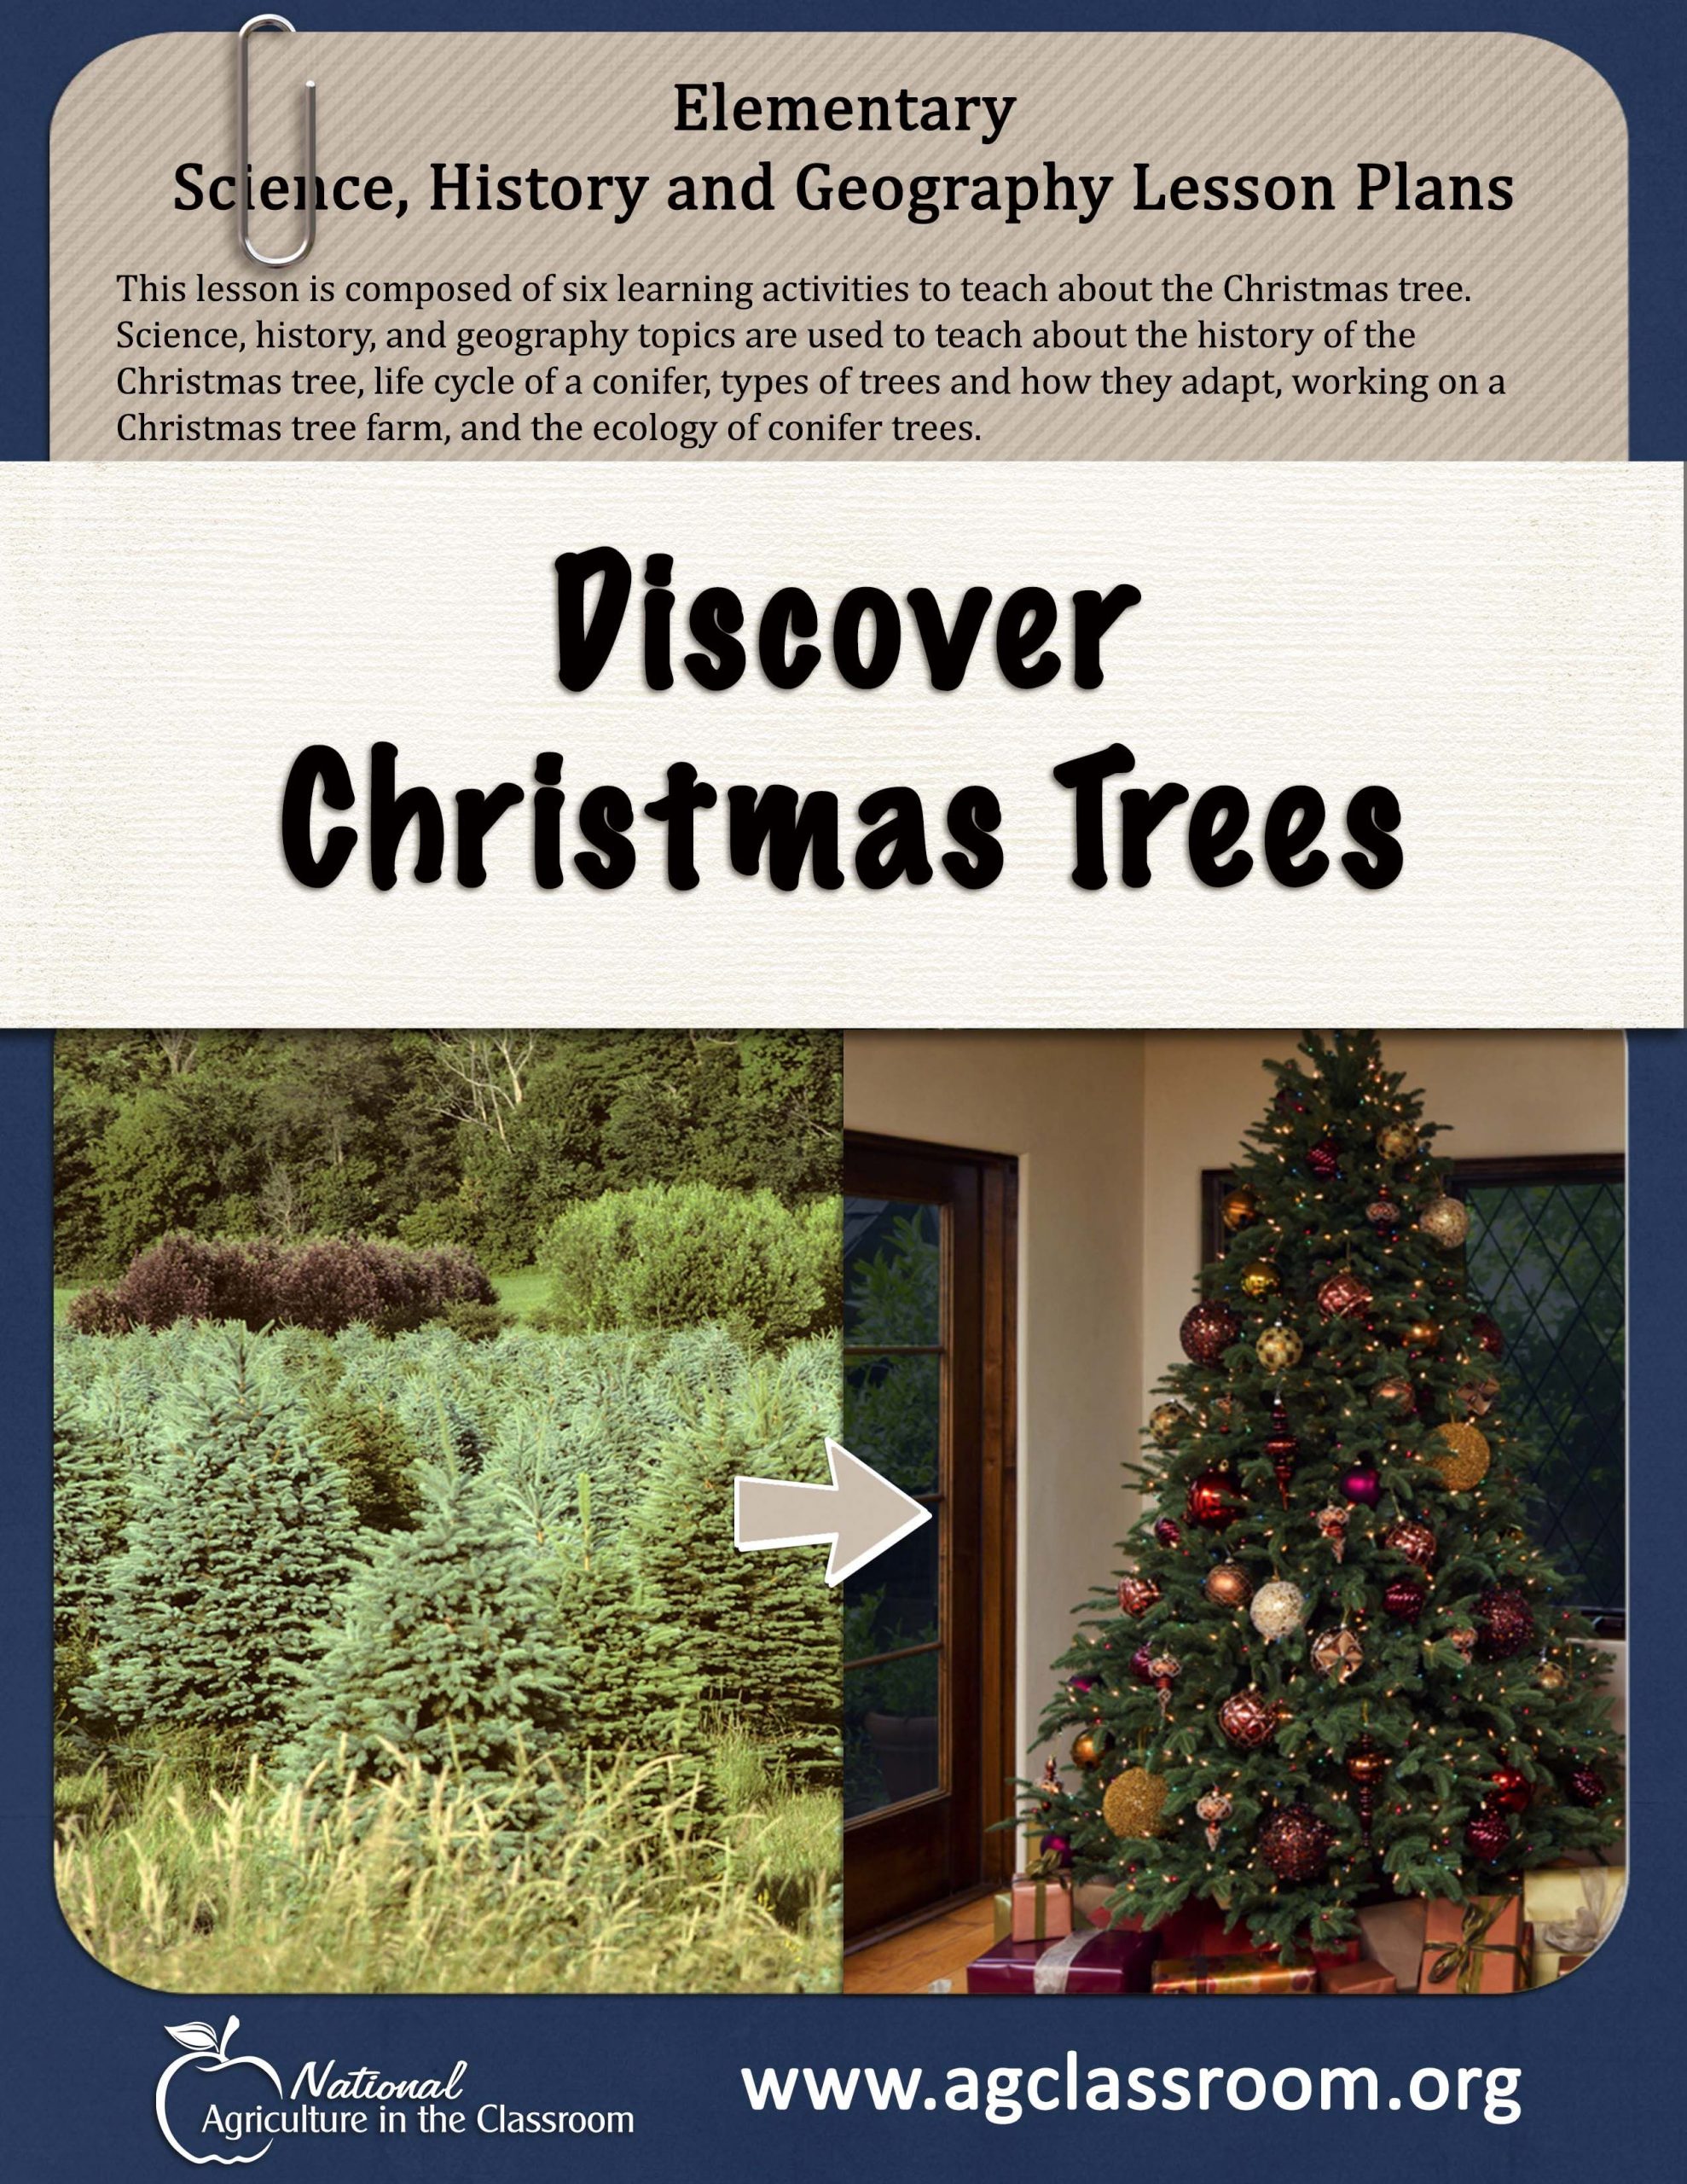 Elementary Lesson Plan All About Christmas Trees. Integrates